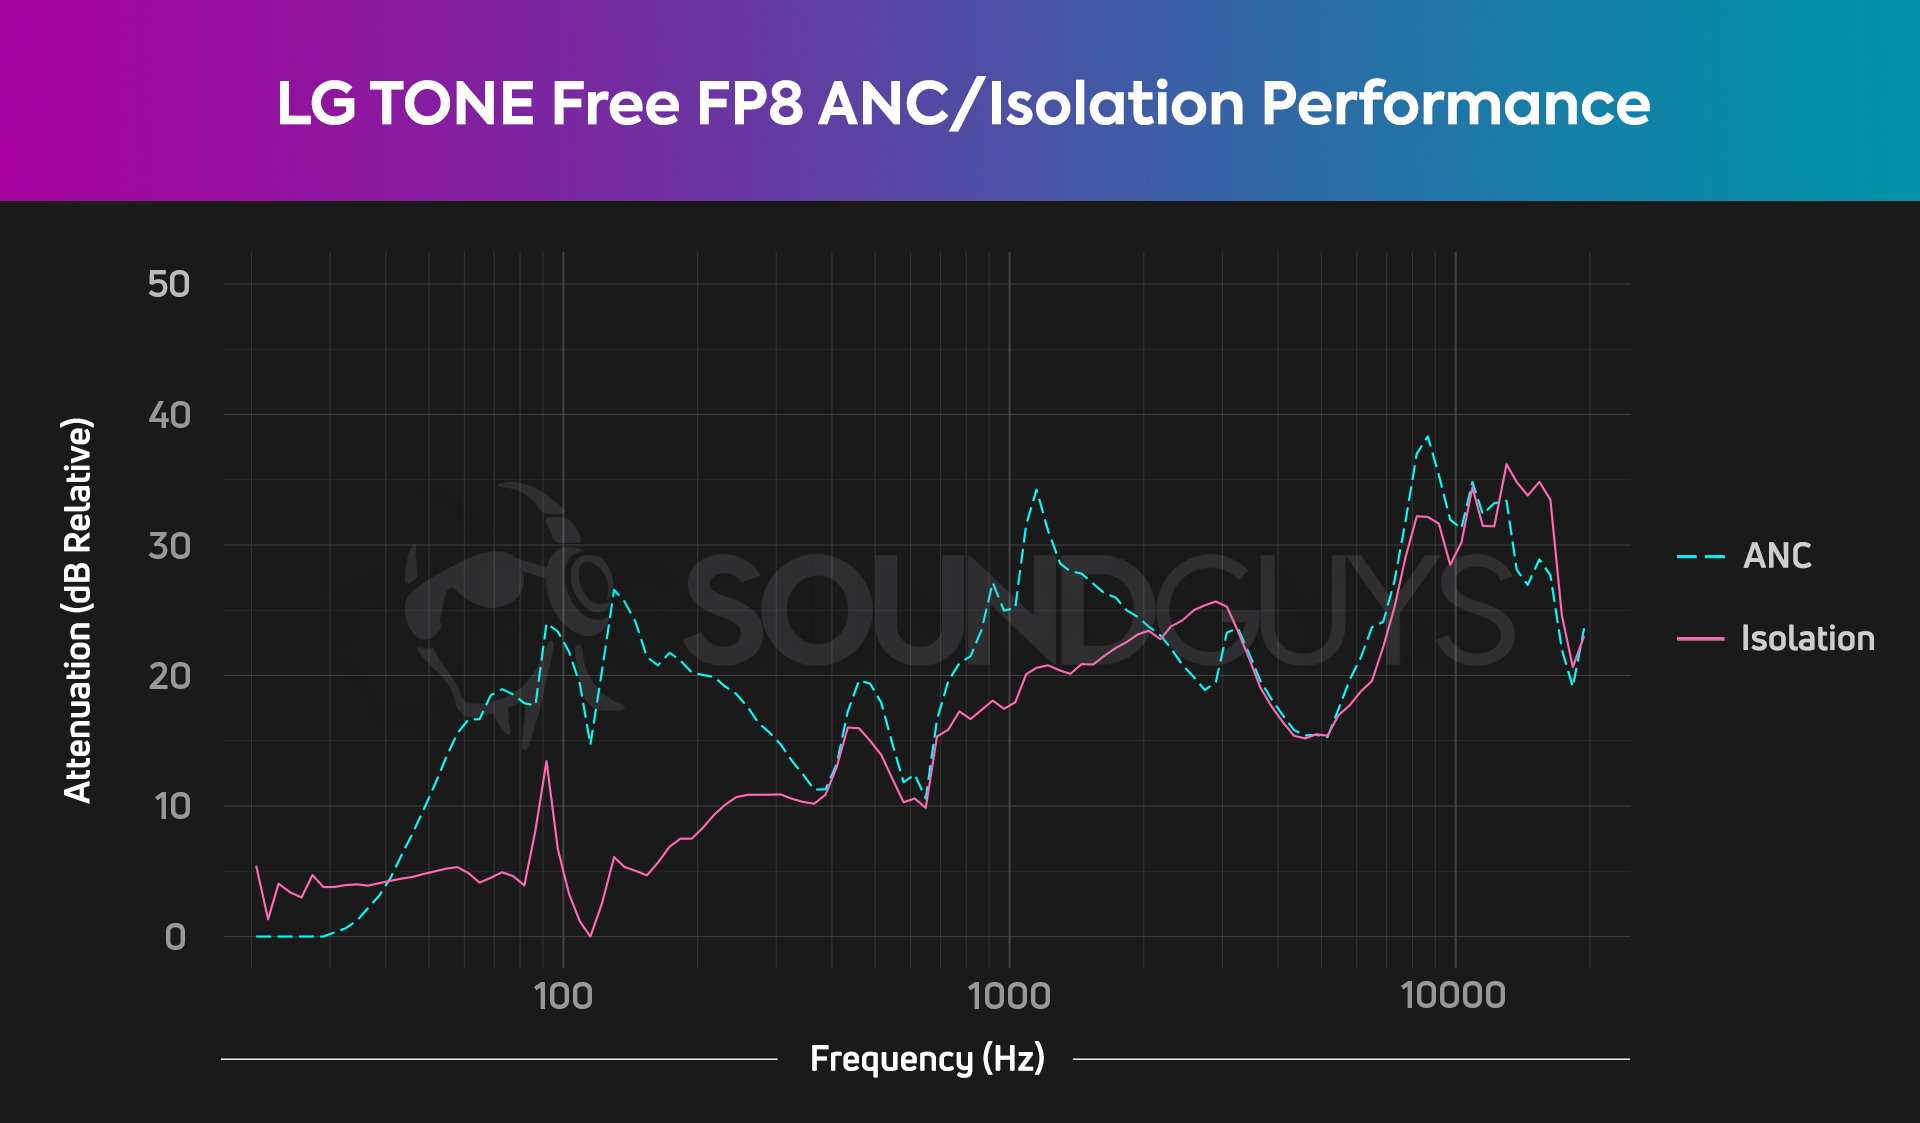 LG TONE Free FP8 ANC and isolation performance measured on a graph.